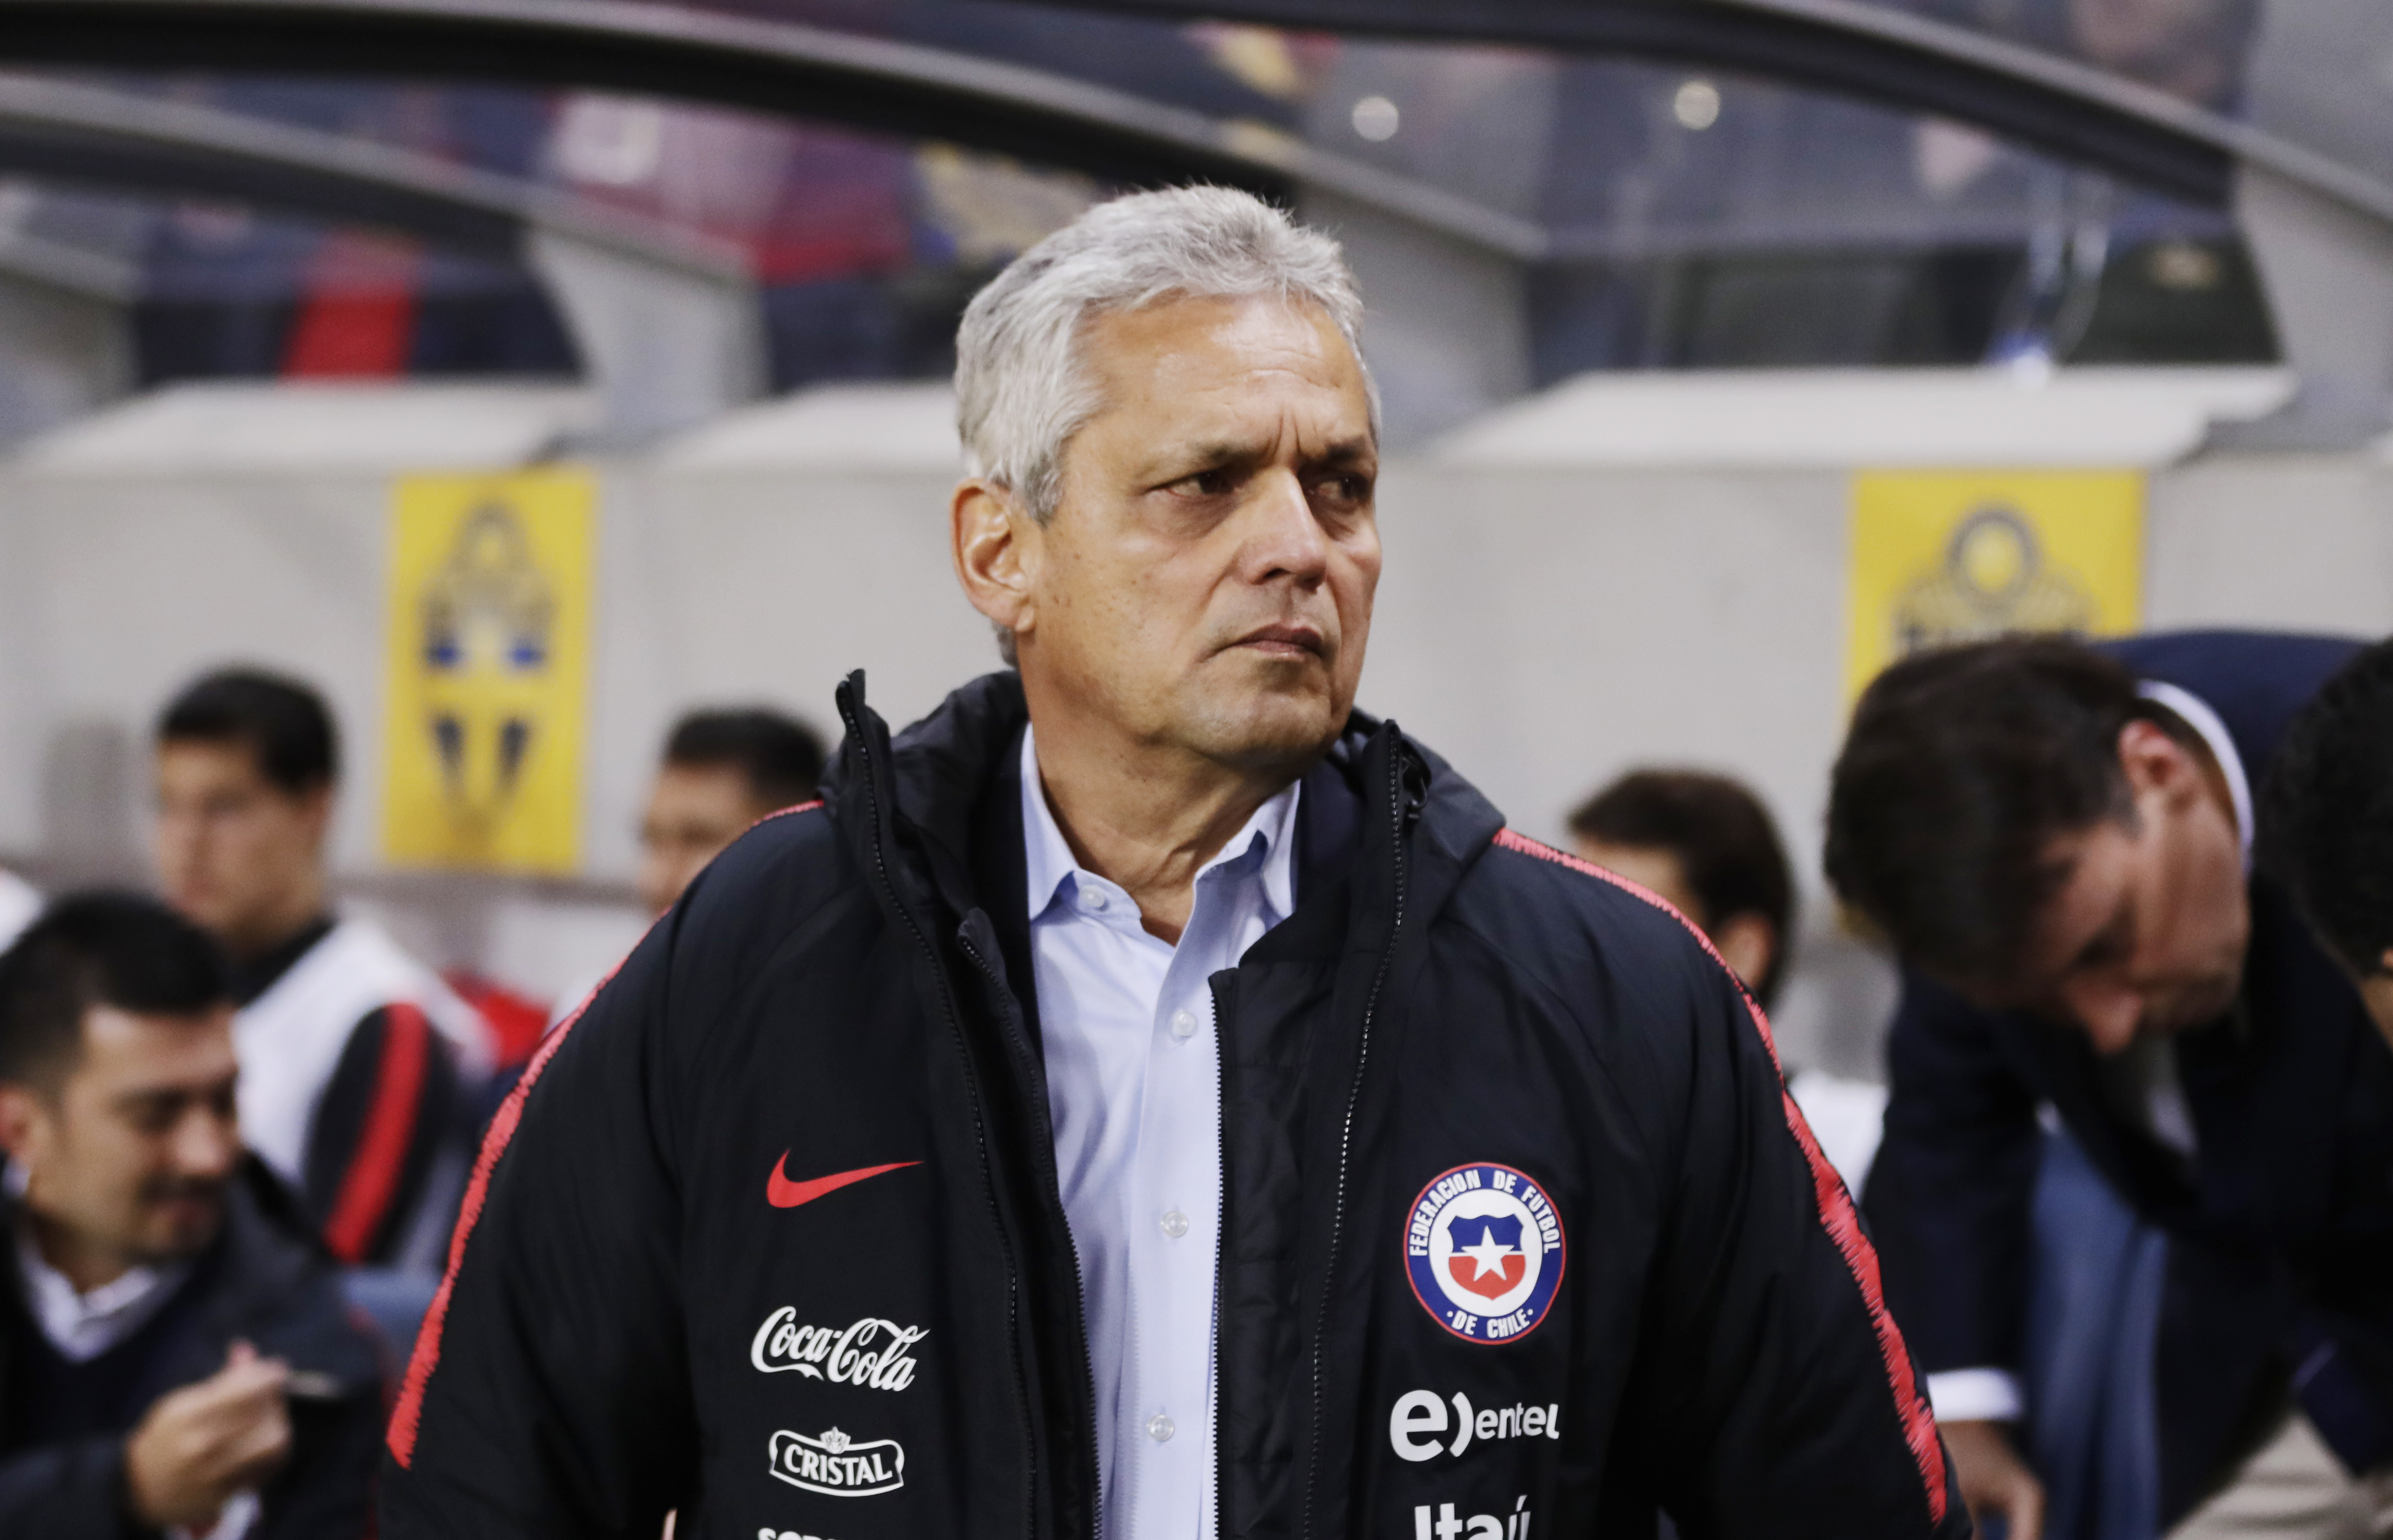 SOLNA, SWEDEN - MARCH 24: Reinaldo Rueda, head coach of Chile during the International Friendly match between Sweden and Chile at Friends arena on March 24, 2018 in Solna, Sweden. (Photo by Nils Petter Nilsson/Ombrello/Getty Images)